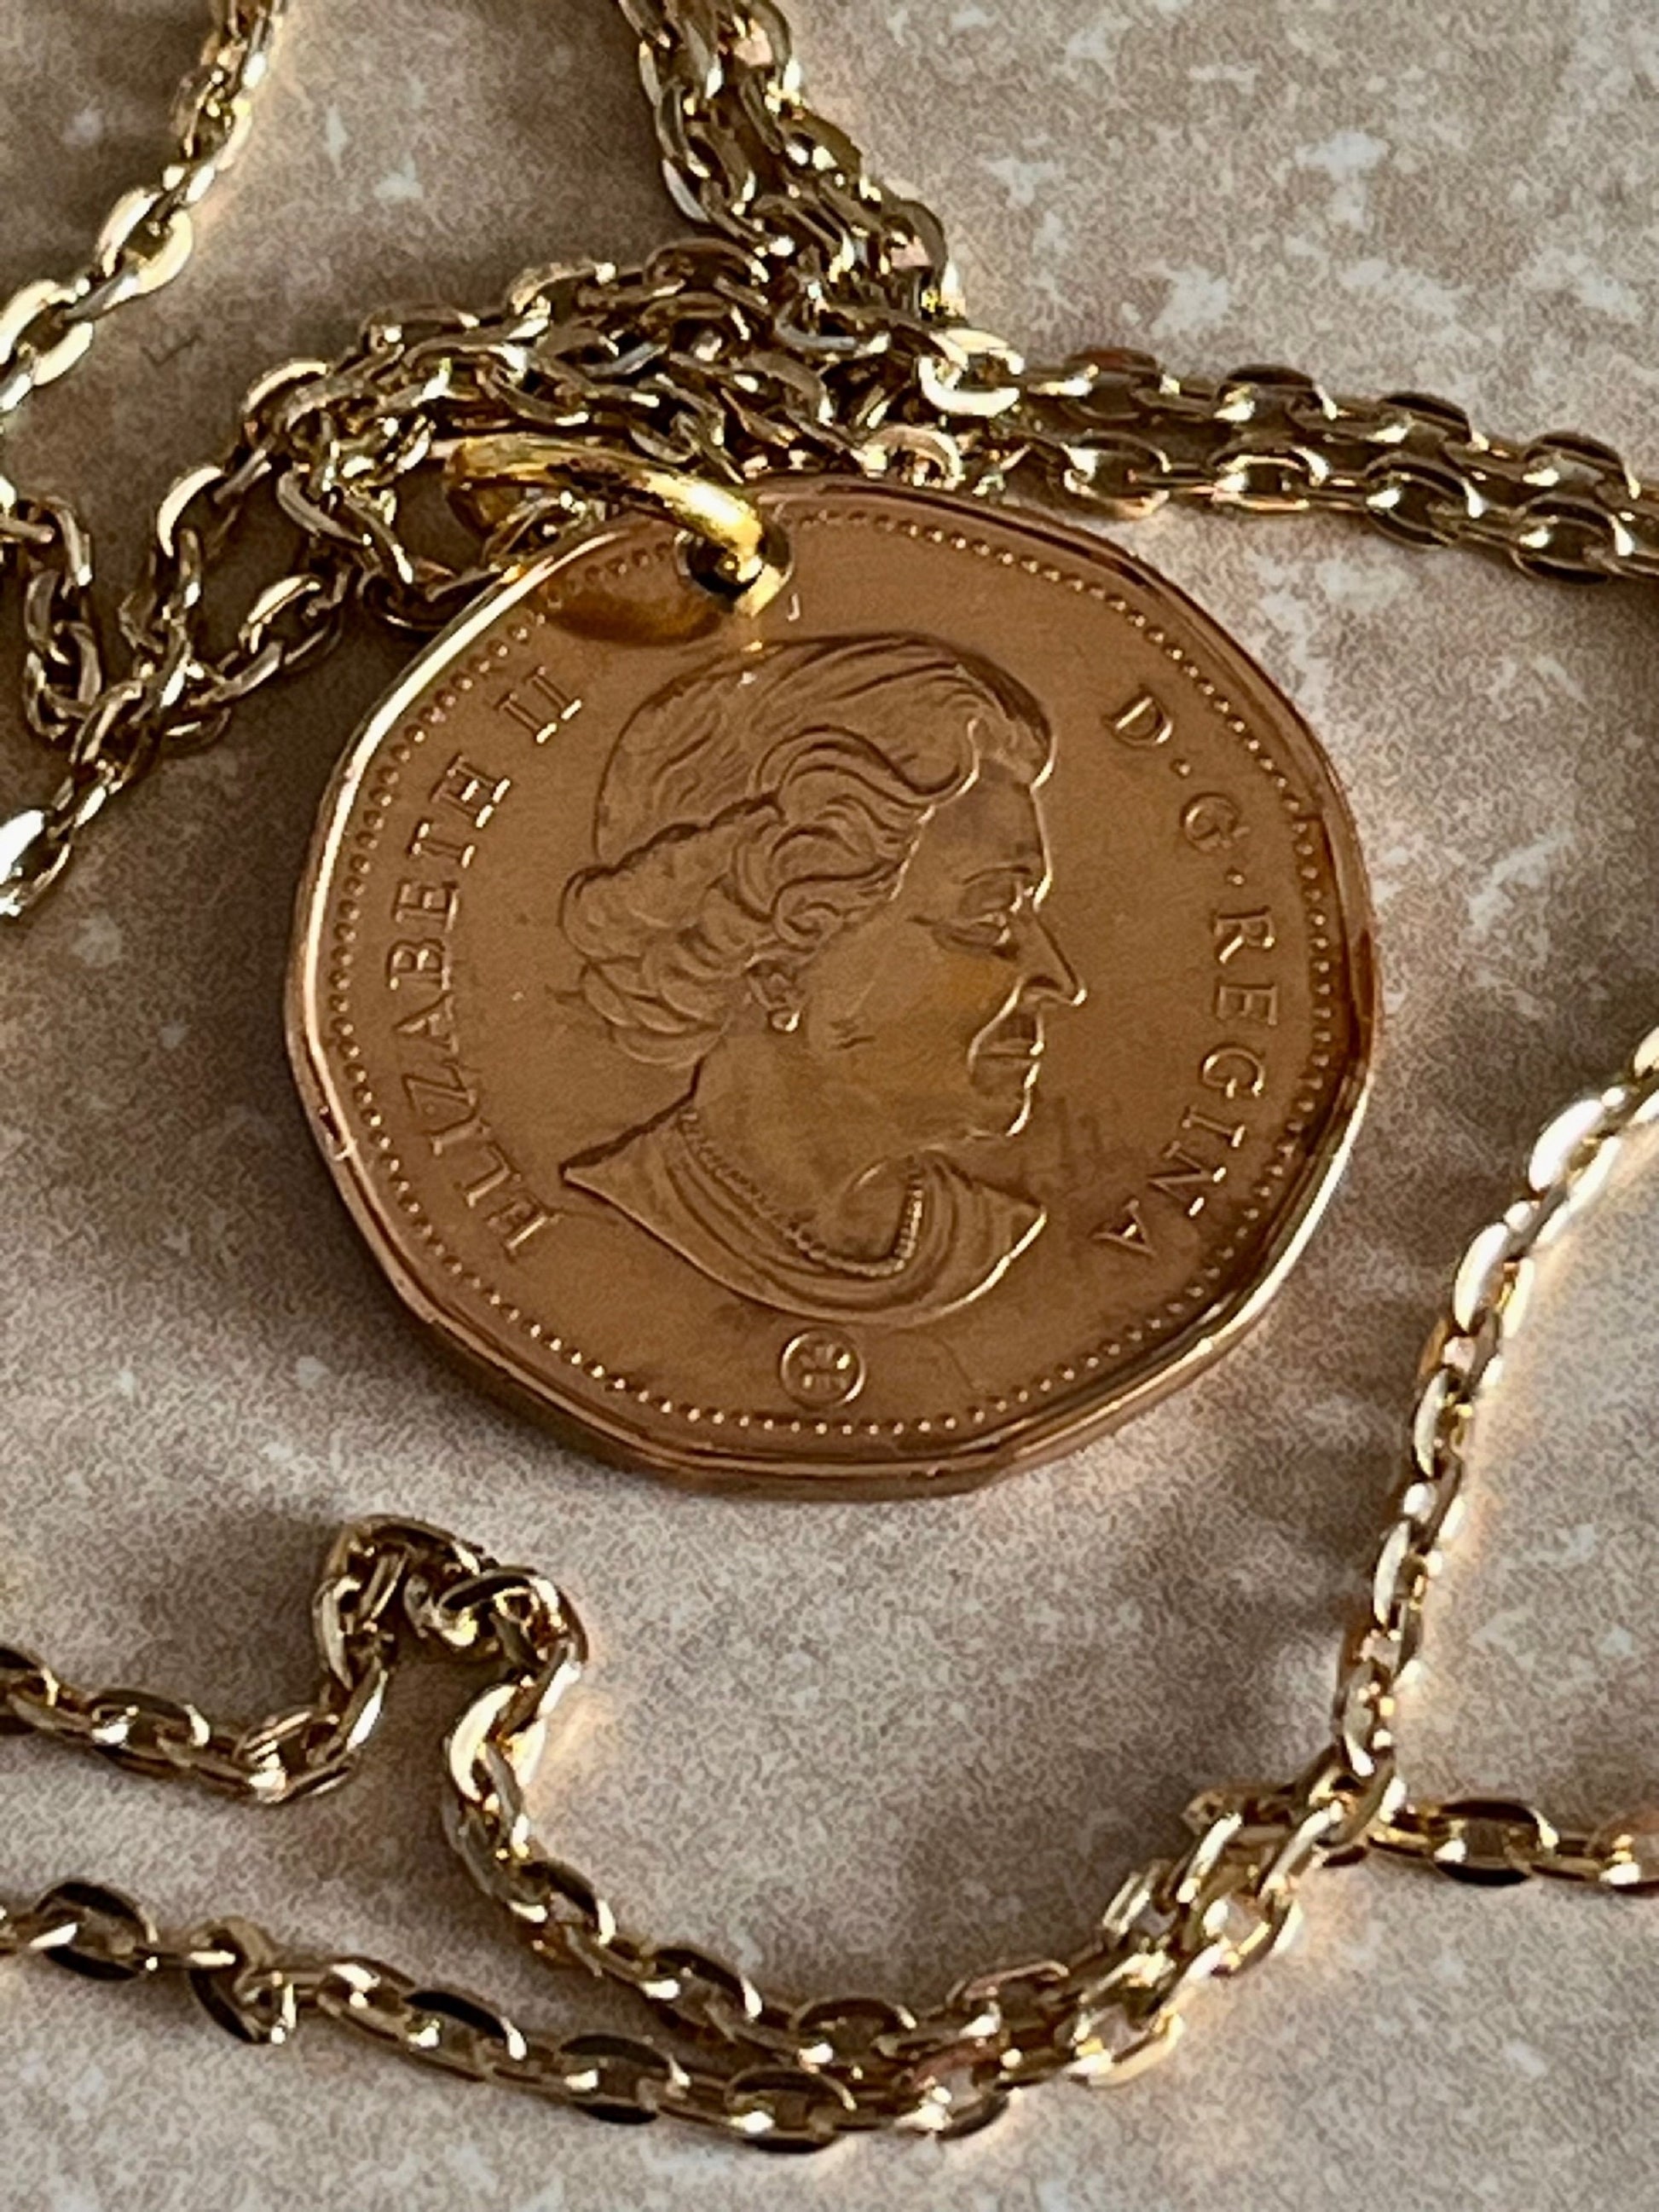 Canada Coin Necklace Pendant 2008 Flying Loon Dollar Loonie Personal Handmade Jewelry Gift Friend Charm For Him Her World Coin Collector